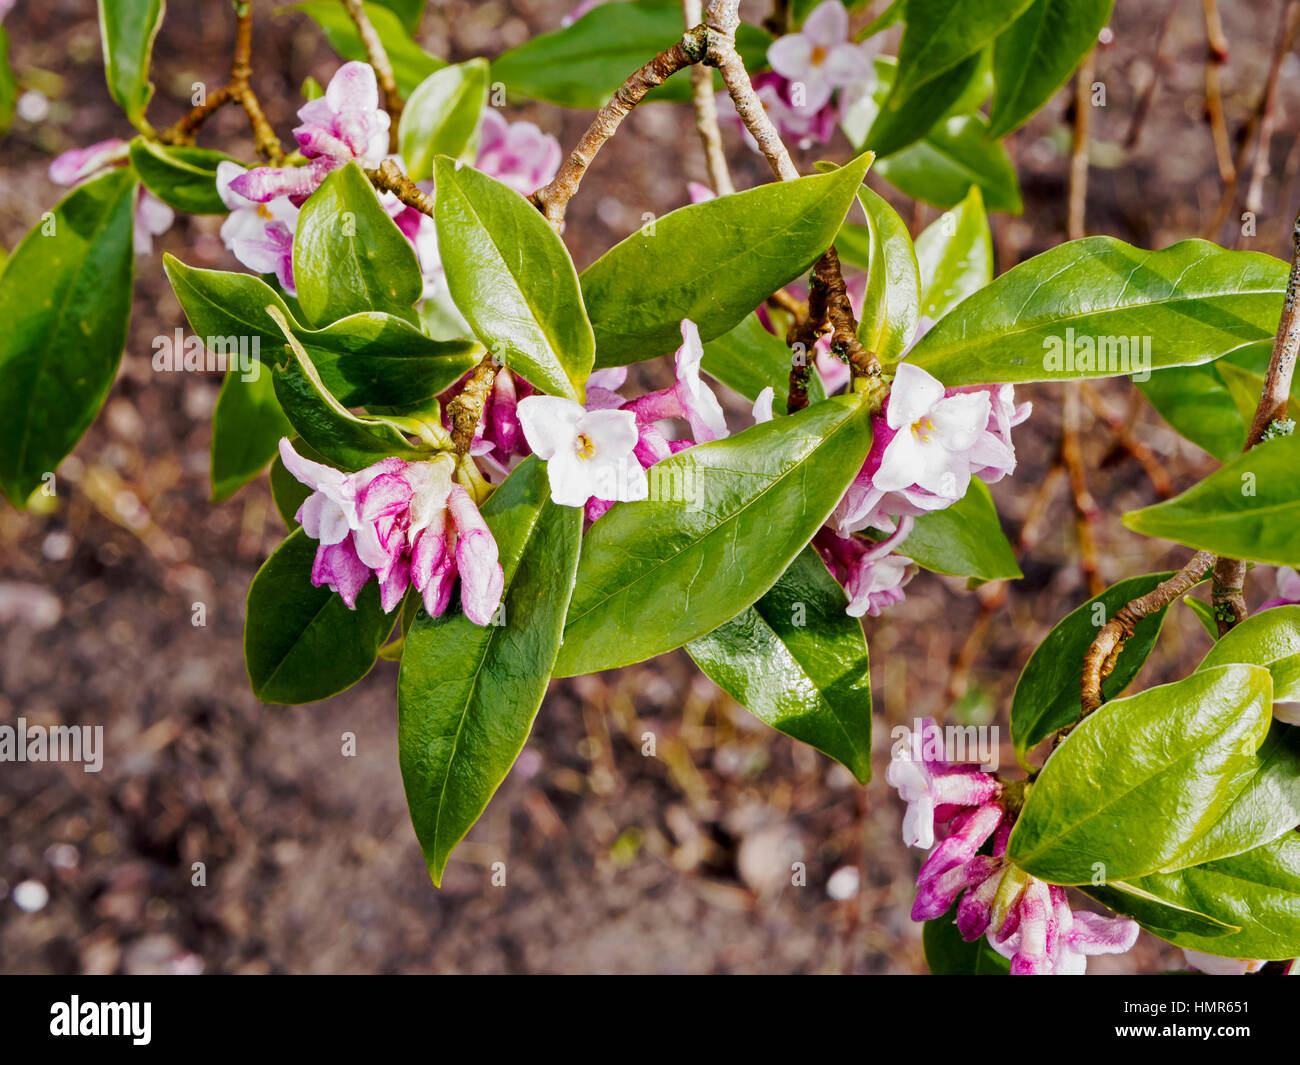 The flowers of Daphne Bholua 'Jacqueline Postill' bring a little spring cheer to a woodland shrubbery in a winter garde in Hampshire. Stock Photo